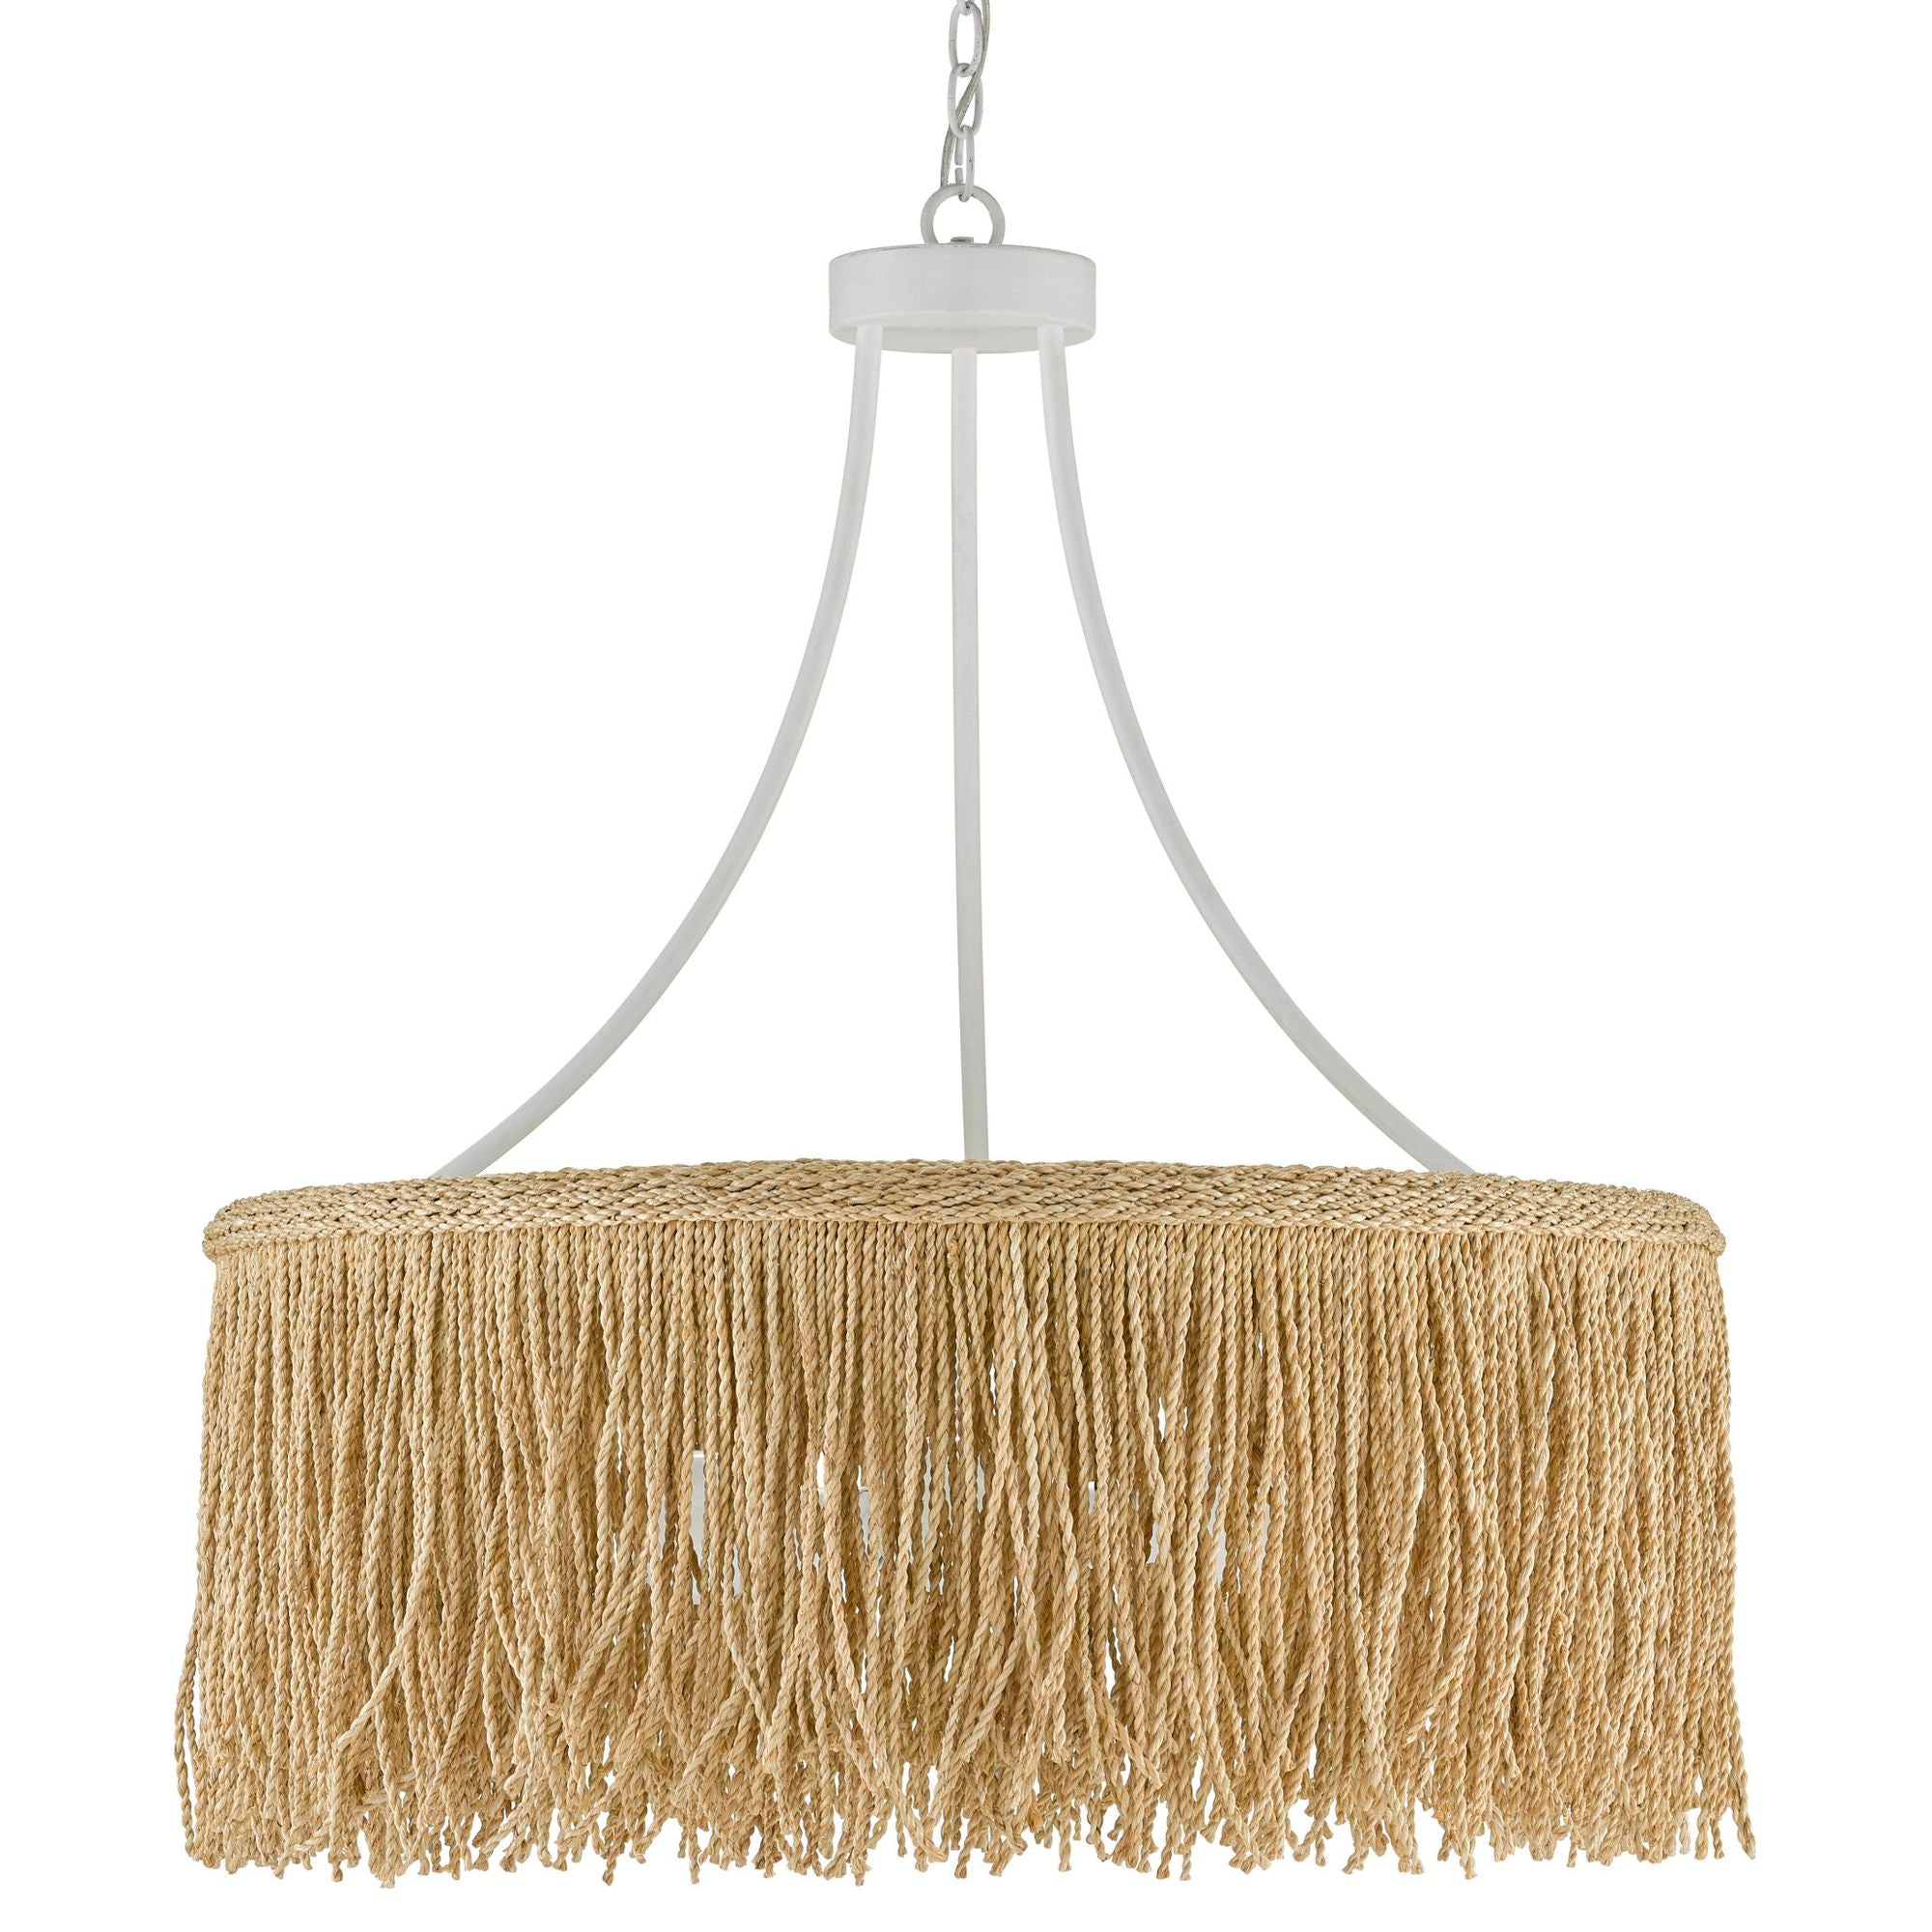 Samoa Rope Chandelier - Gesso White/Natural Rope